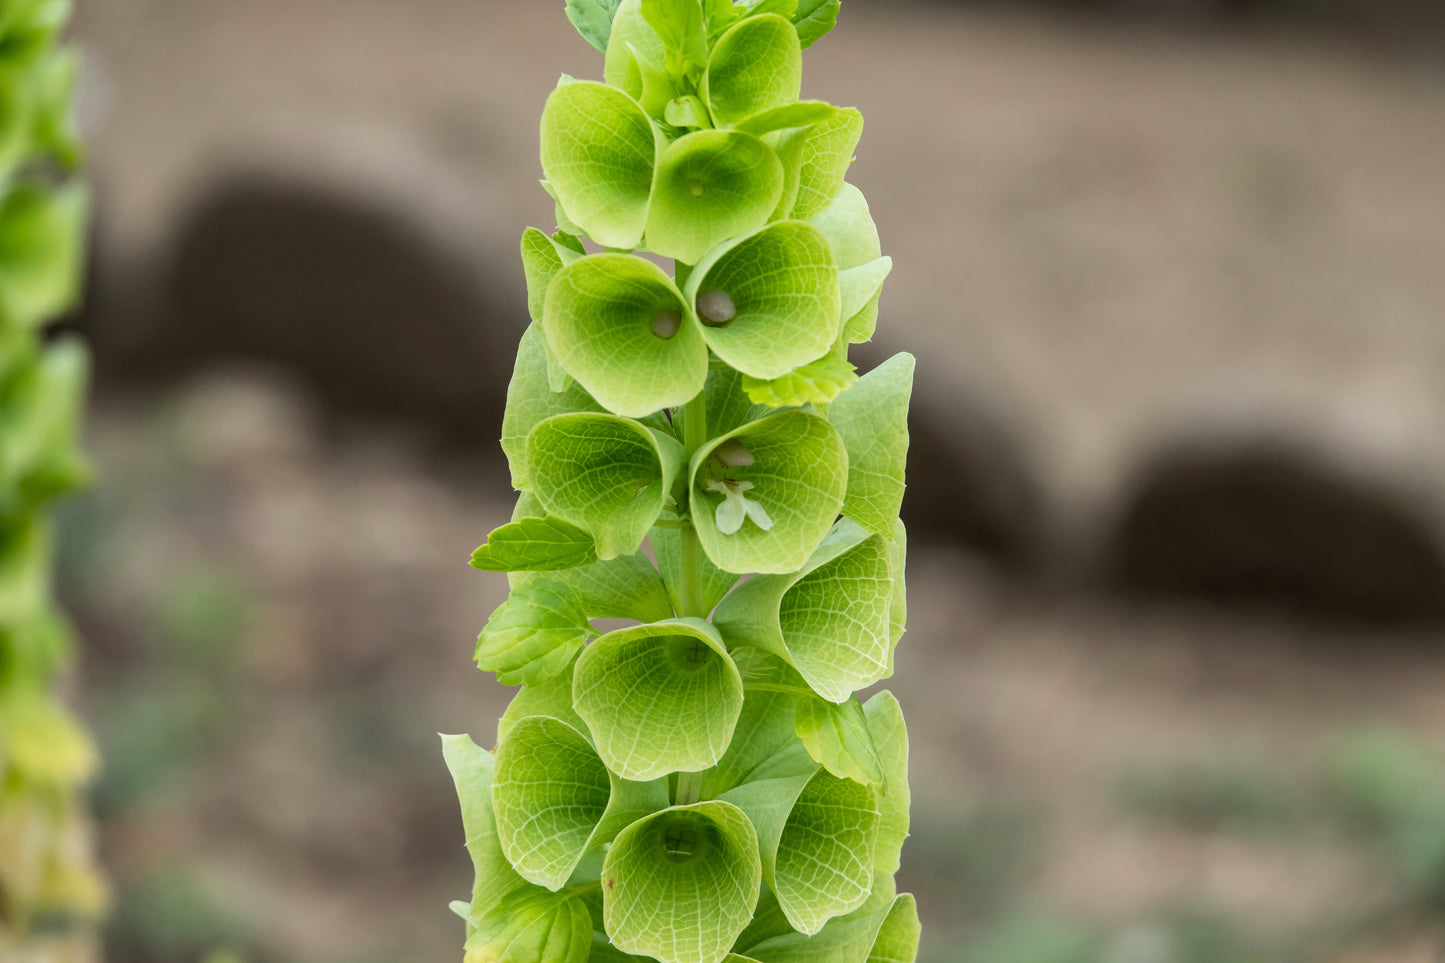 150 BELLS OF IRELAND ( Lady In The Bathtub / Shell Flower ) Moluccella Laevis Green Flower Seeds